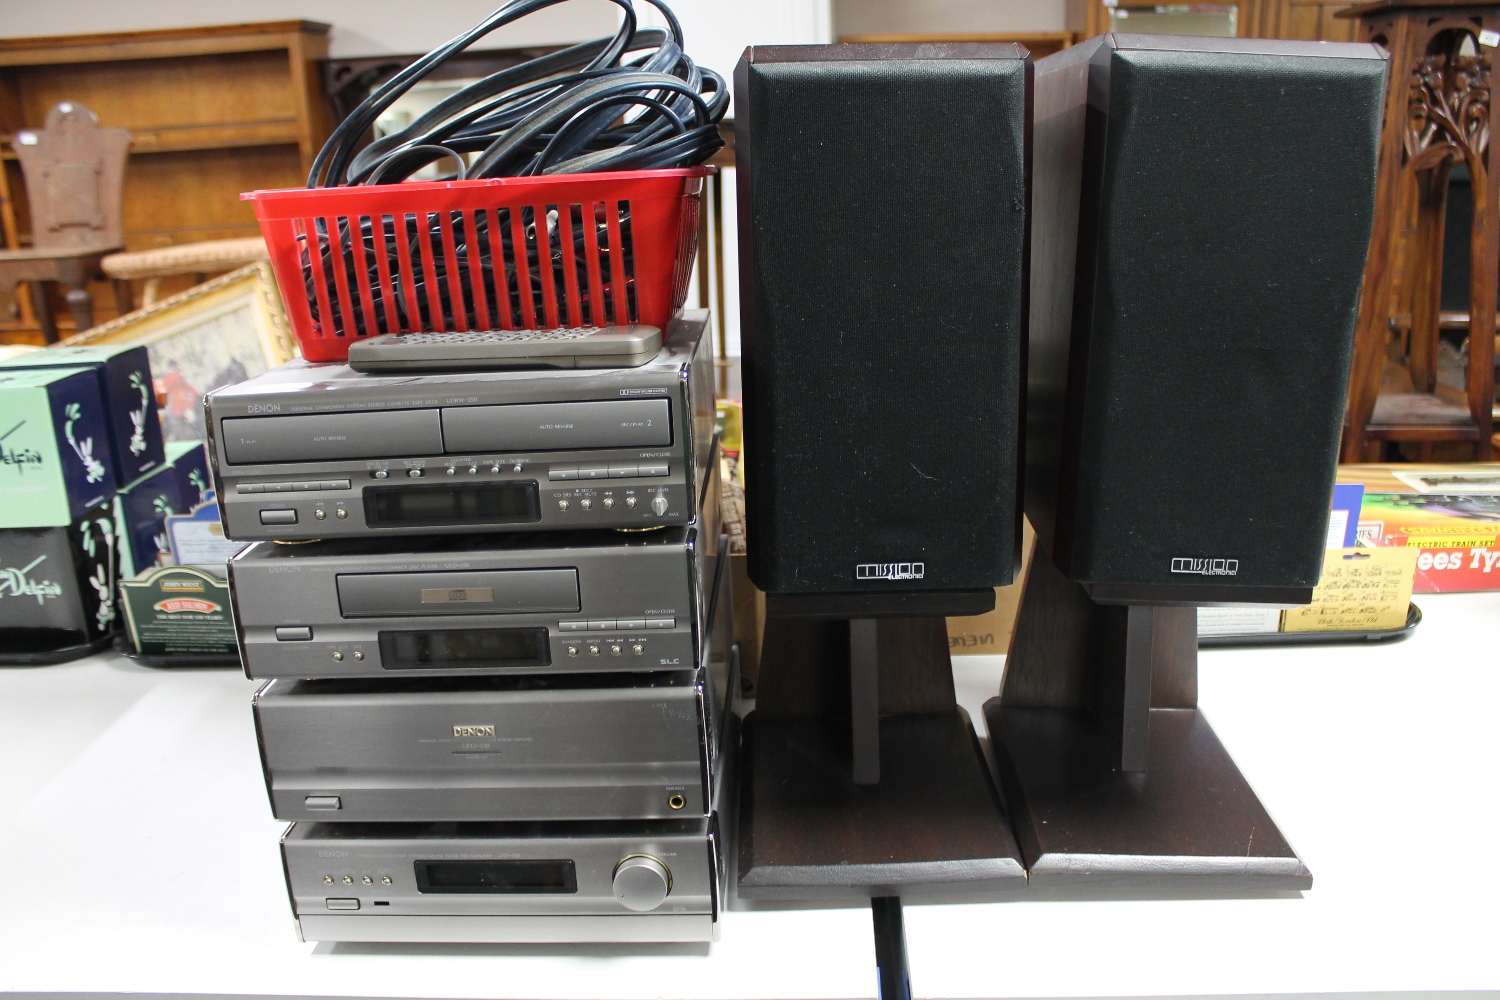 A Denon four piece hifi system with speakers on stand,